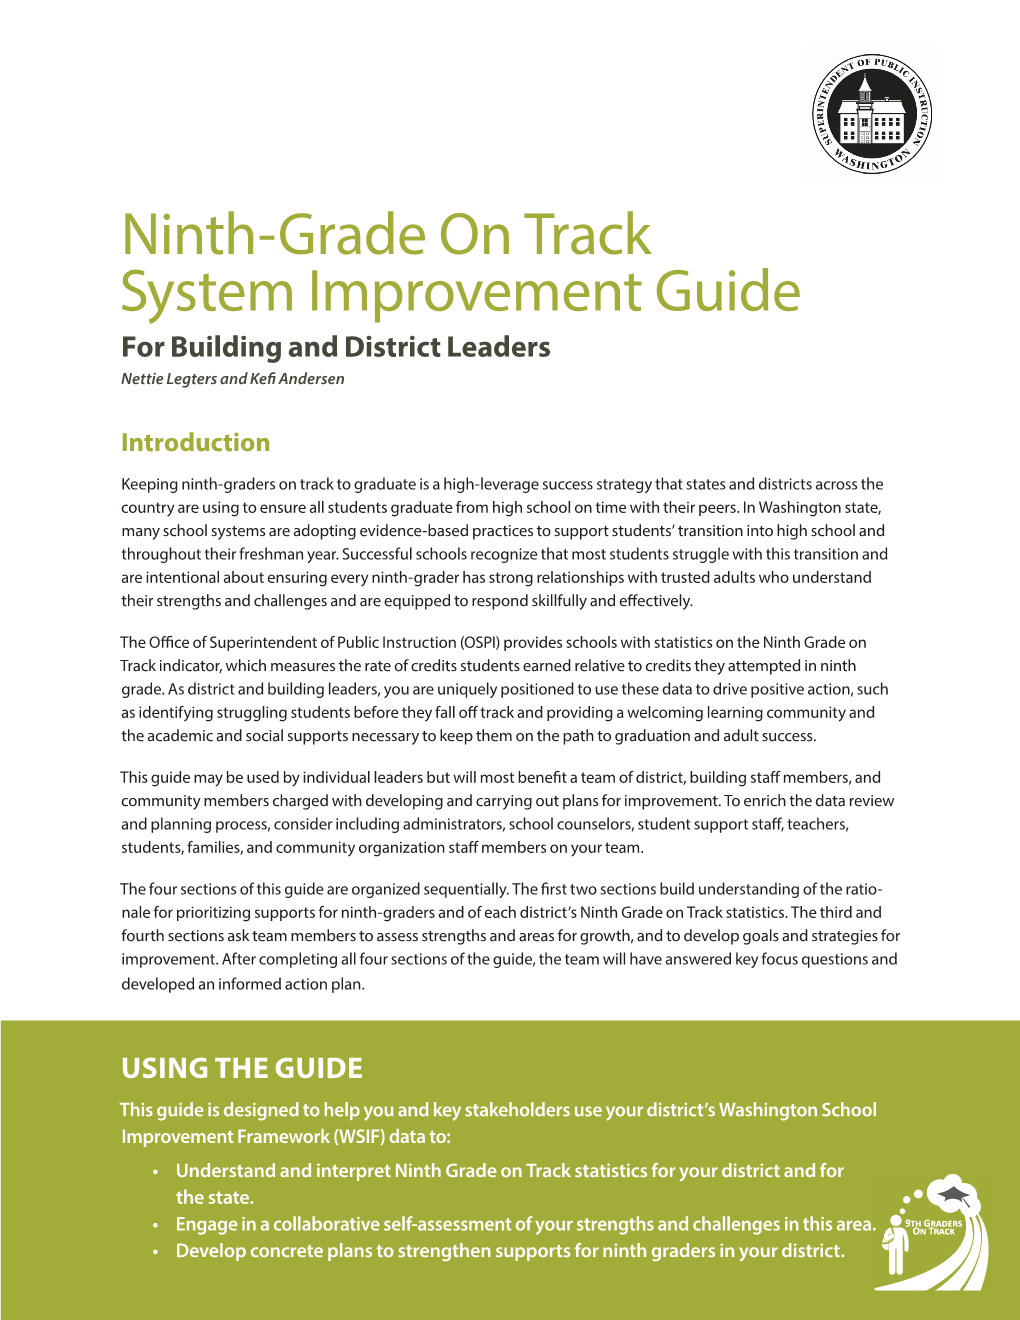 Ninth-Grade on Track System Improvement Guide for Building and District Leaders Nettie Legters and Kefi Andersen